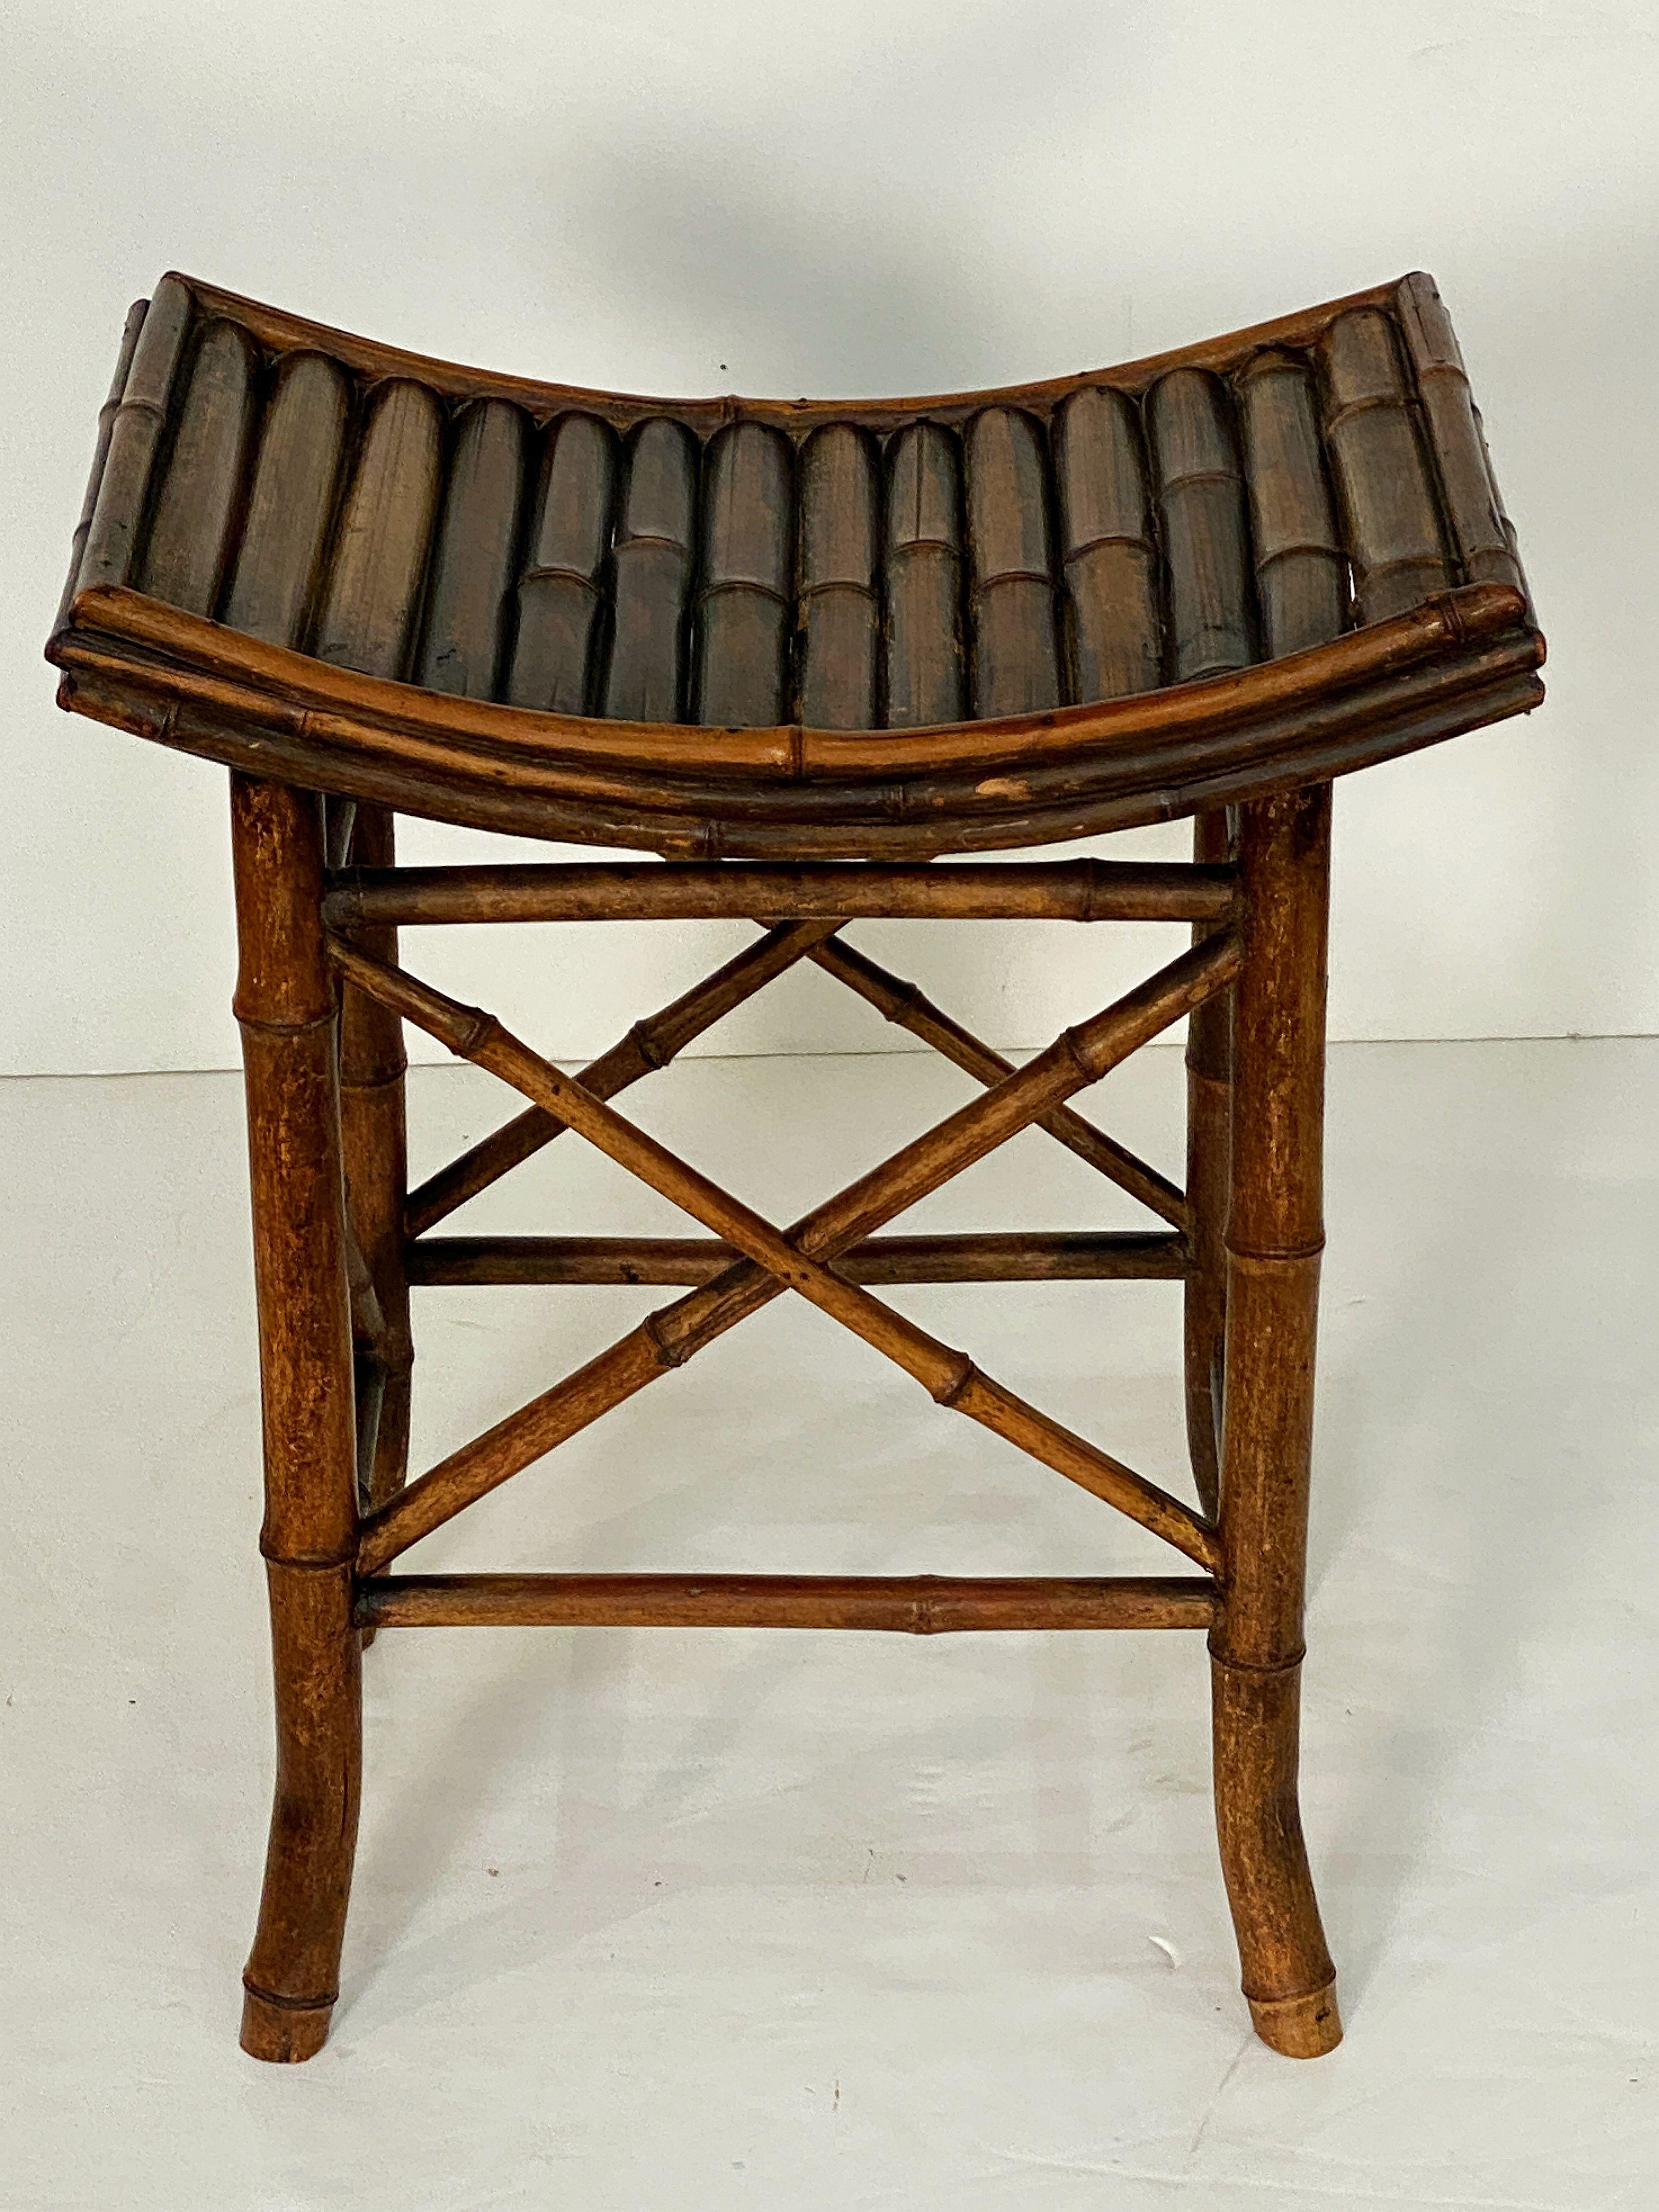 English Bamboo Bench or Stool with Saddle Seat from the Aesthetic Movement Era For Sale 3